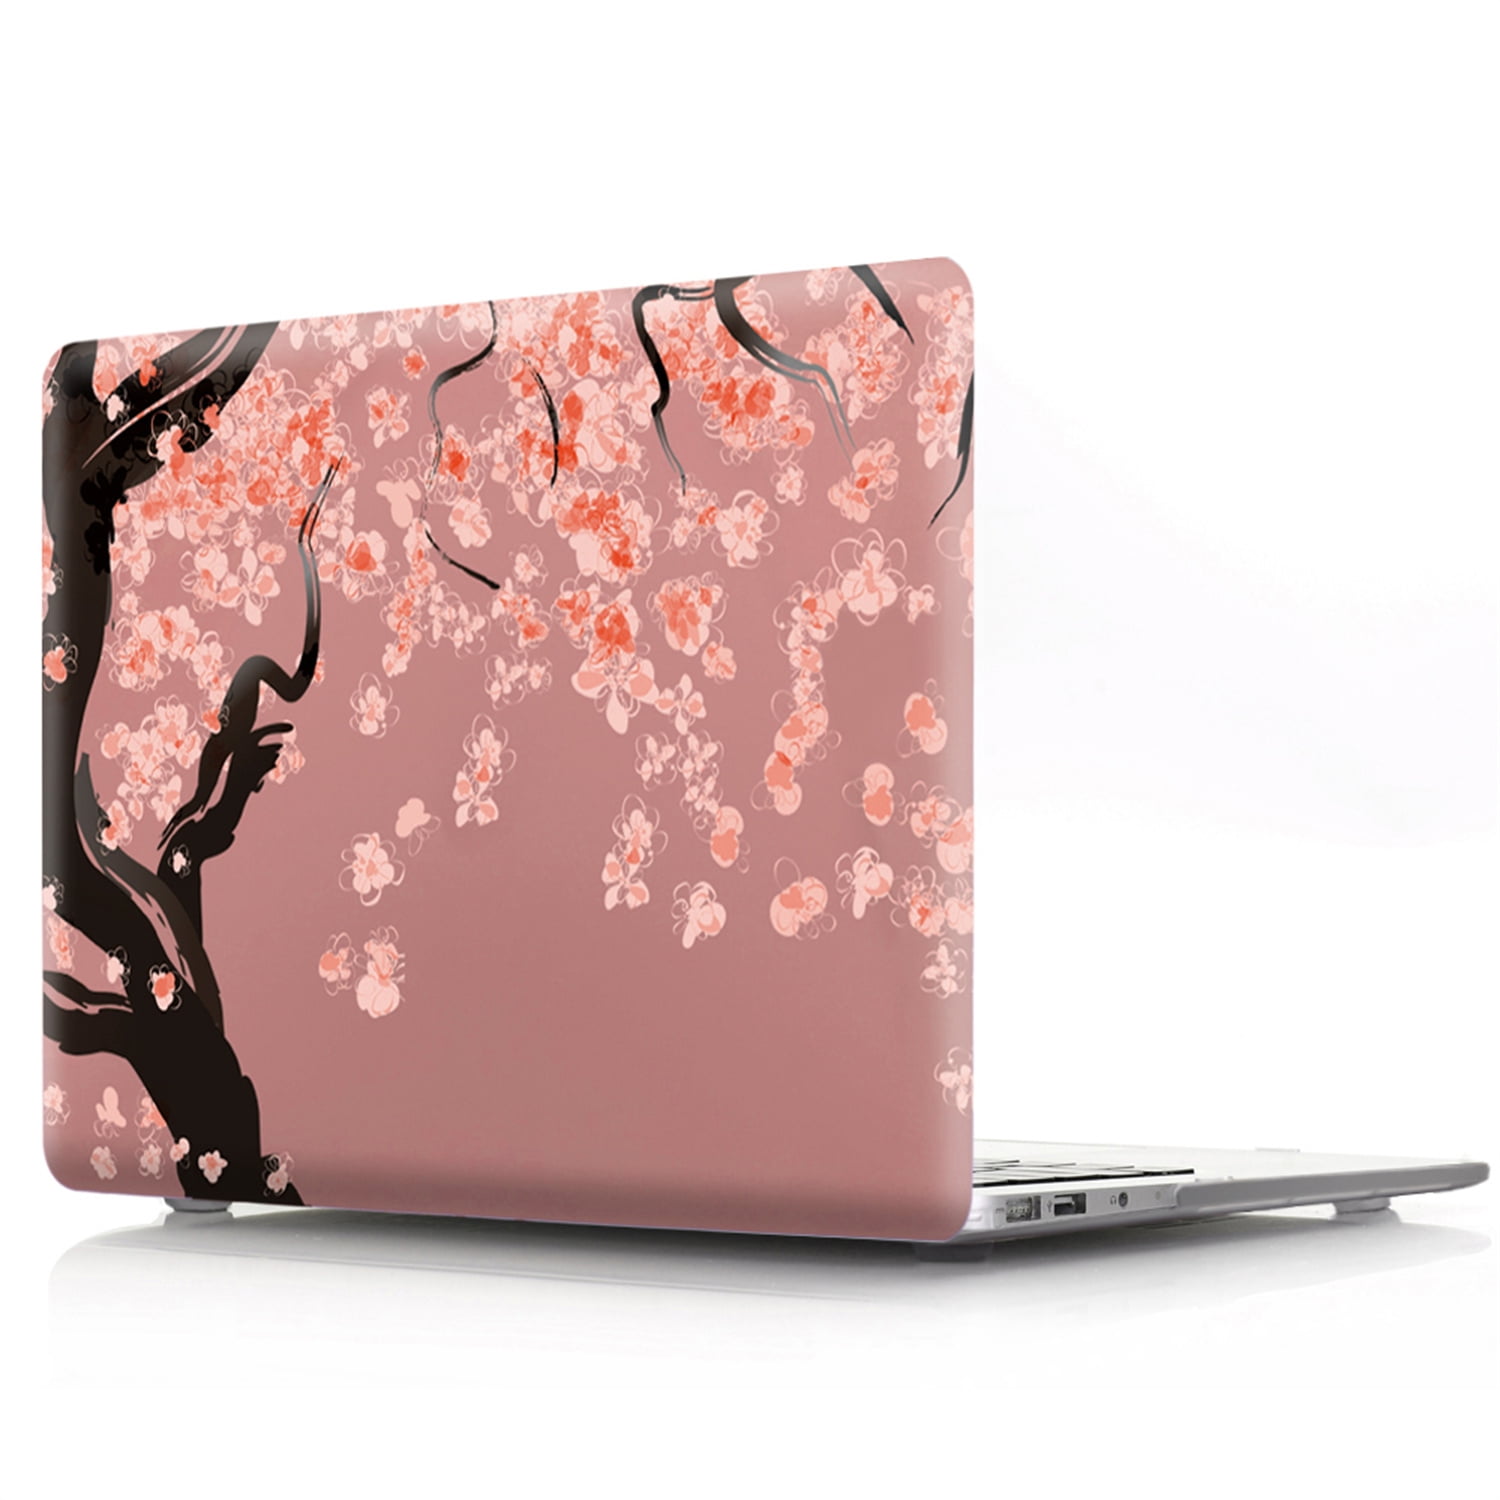 MacBook Air (11-inch, Models: A1370 / A1465) Cherry Blossoms Hard Shell  Case with Keyboard Cover - H